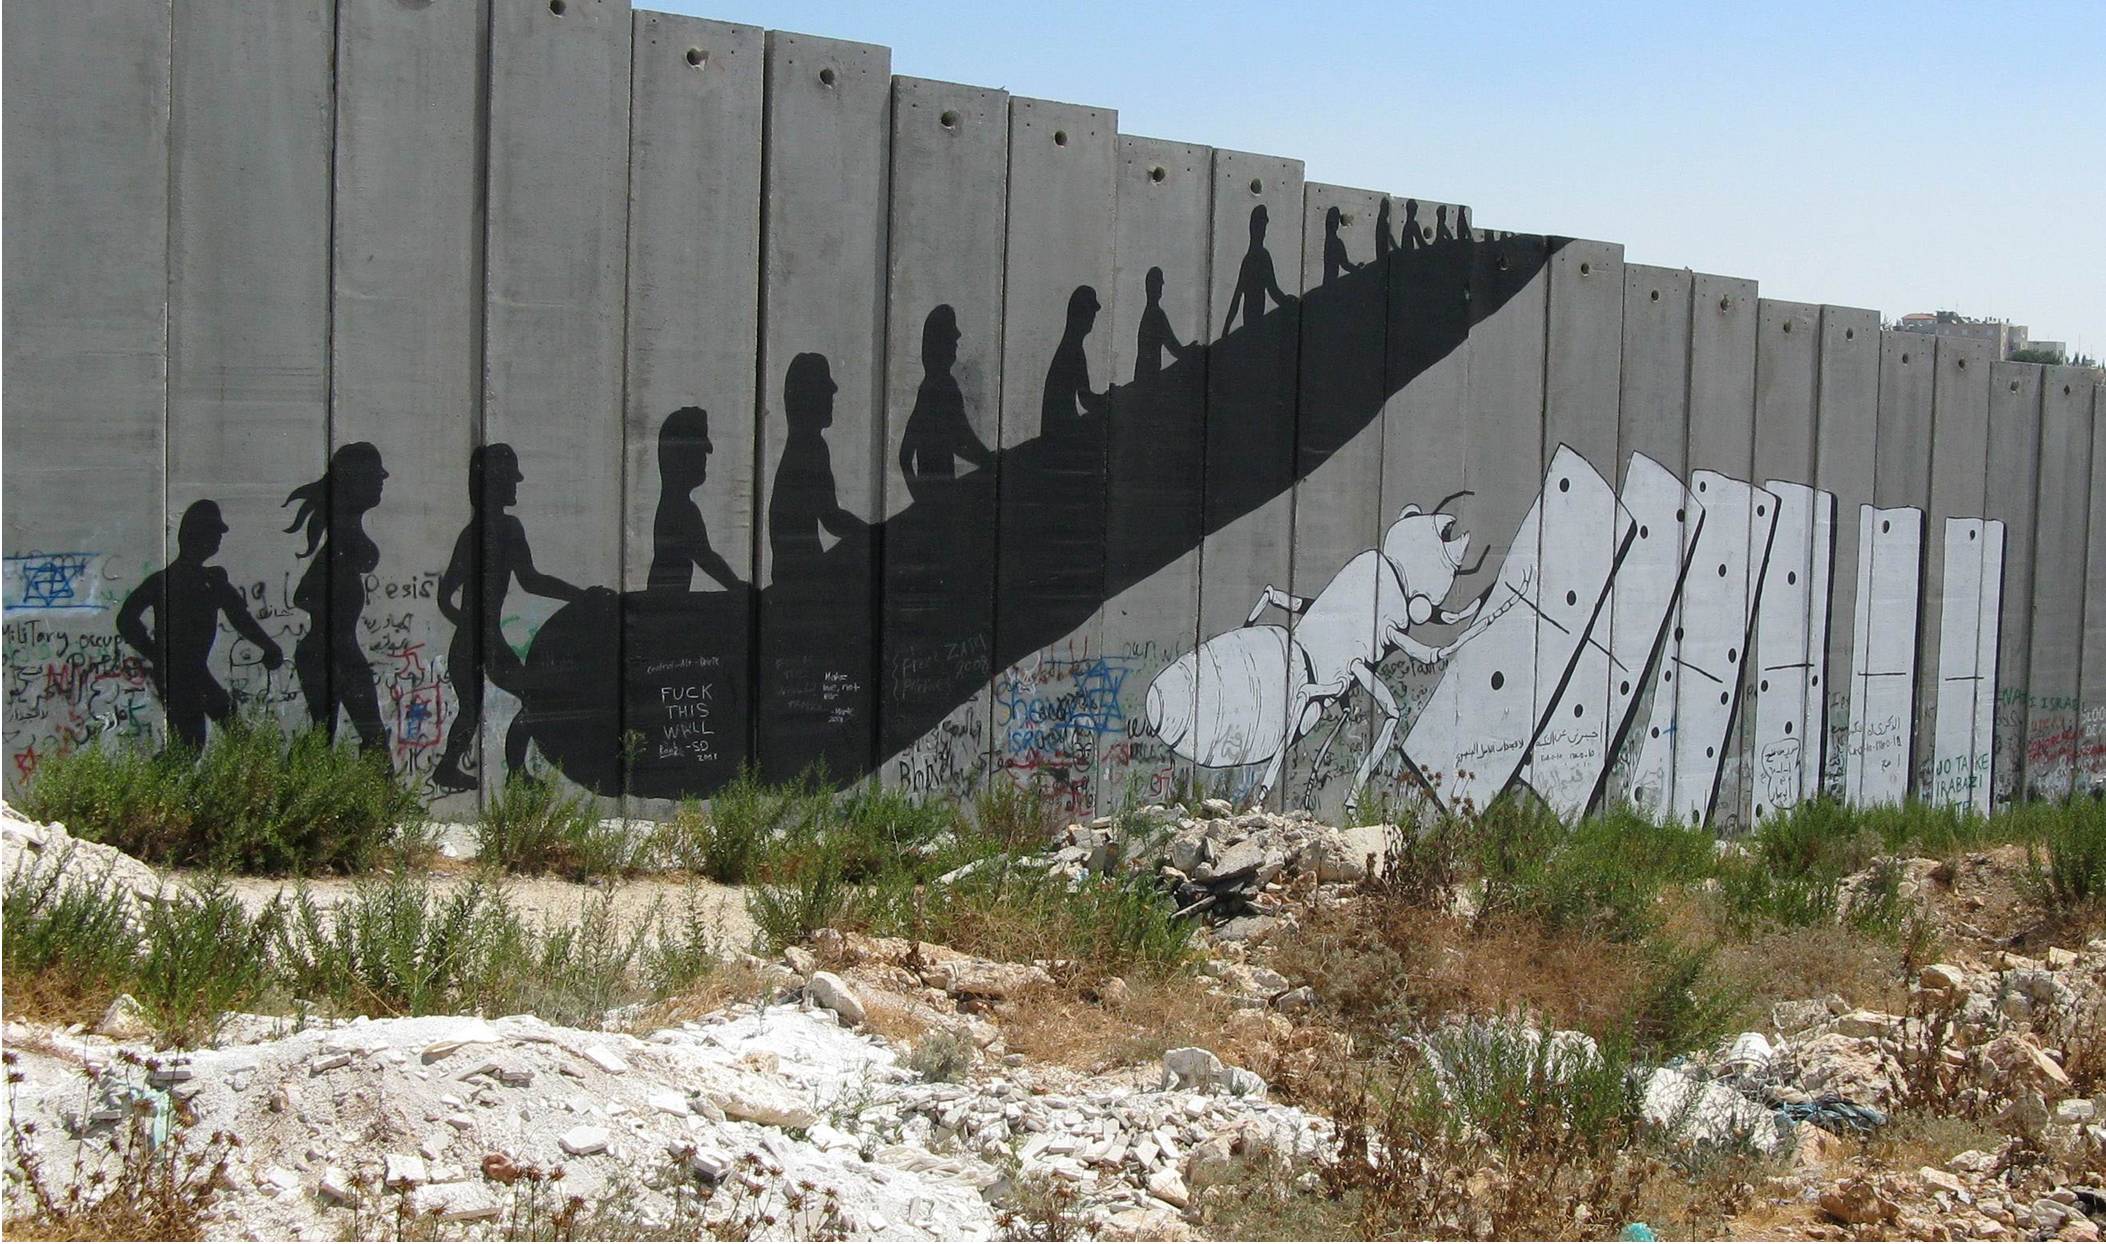 enclosure-of-gaza-as-a-prison-territory-construction-of-new-high